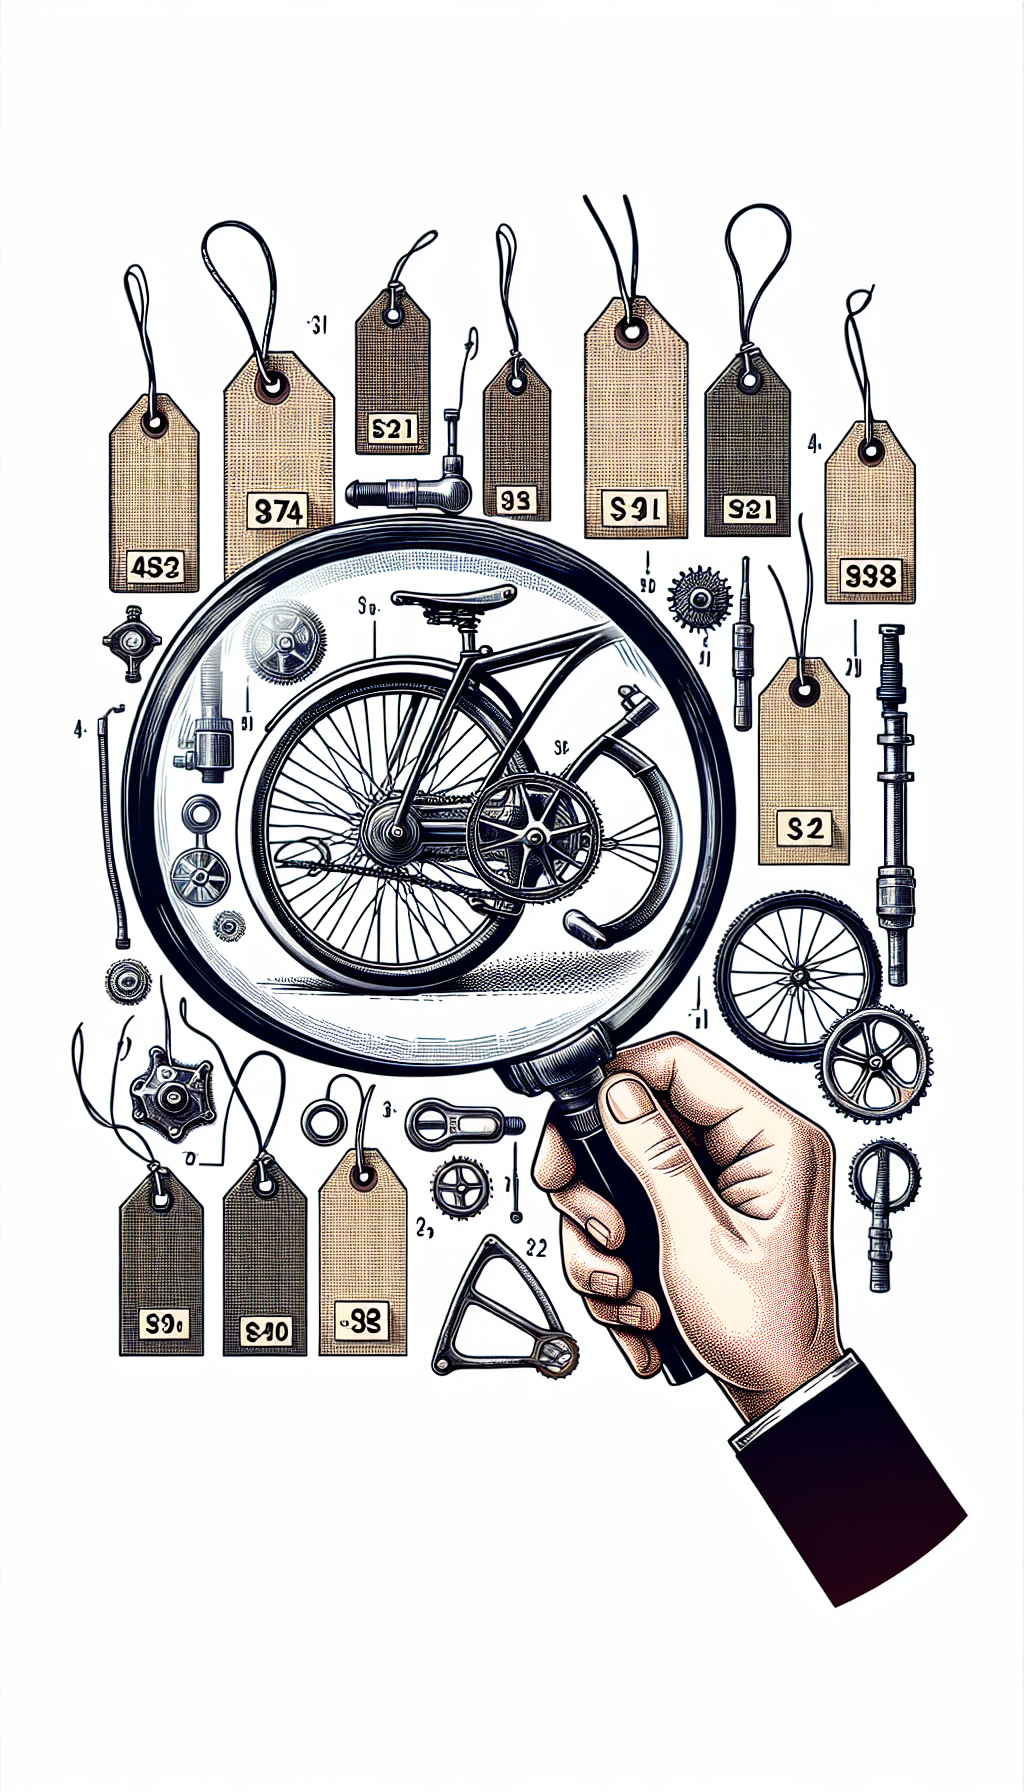 An illustration displays a magnifying glass hovering over distinct features of a classic Schwinn bicycle, such as the badge, frame, and serial number, against a backdrop of price tags showcasing ascending values. The magnifying glass and the bike parts appear in detailed line art, while the price tags have a watercolor texture, symbolizing the blend of scrutiny and valuation.